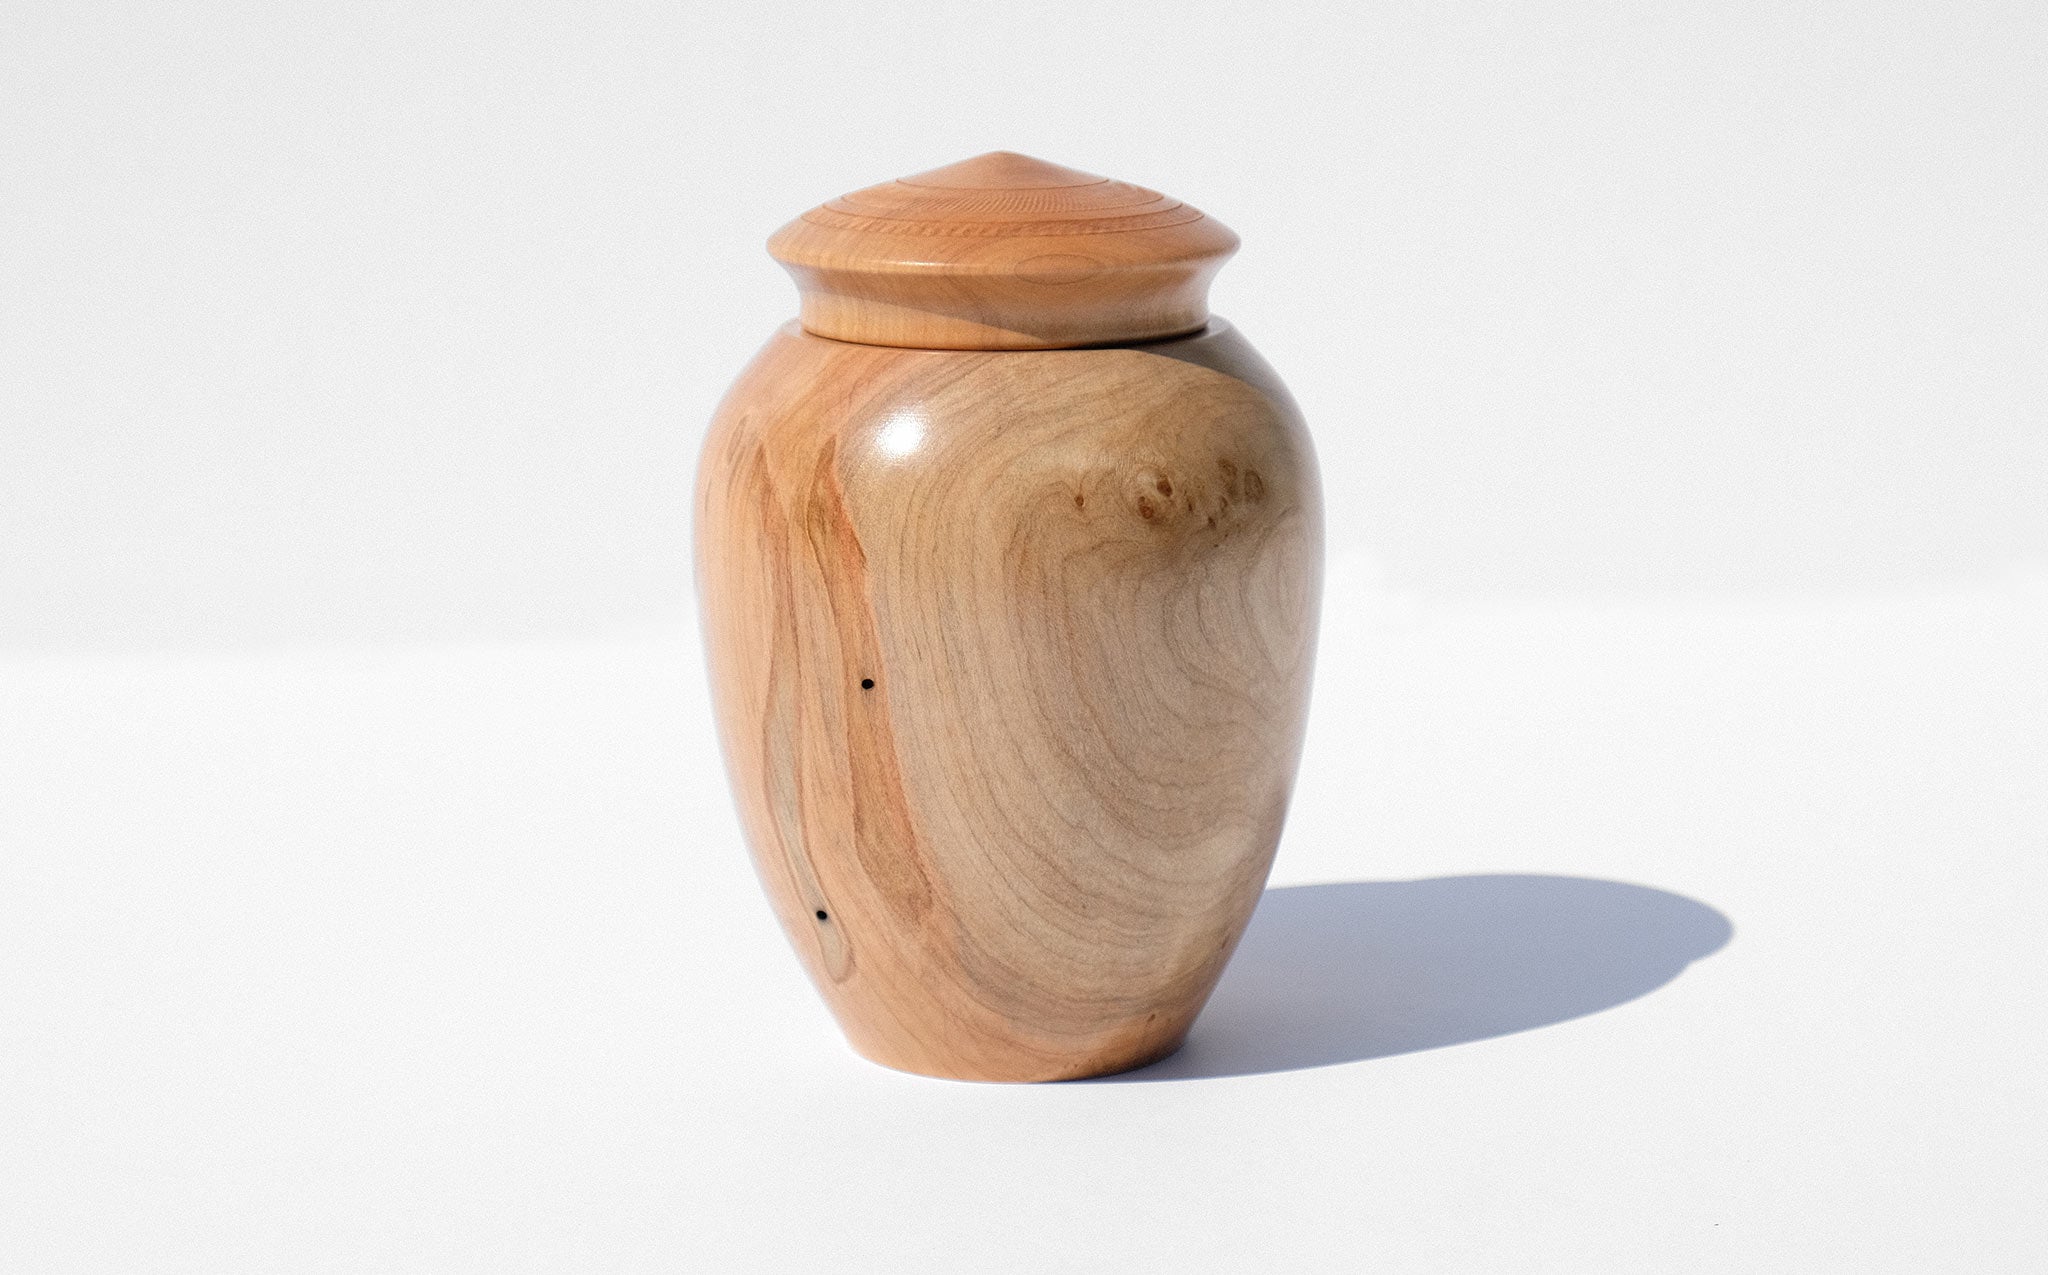 Bruce Perlmutter Hand Lathed Maple Vessel